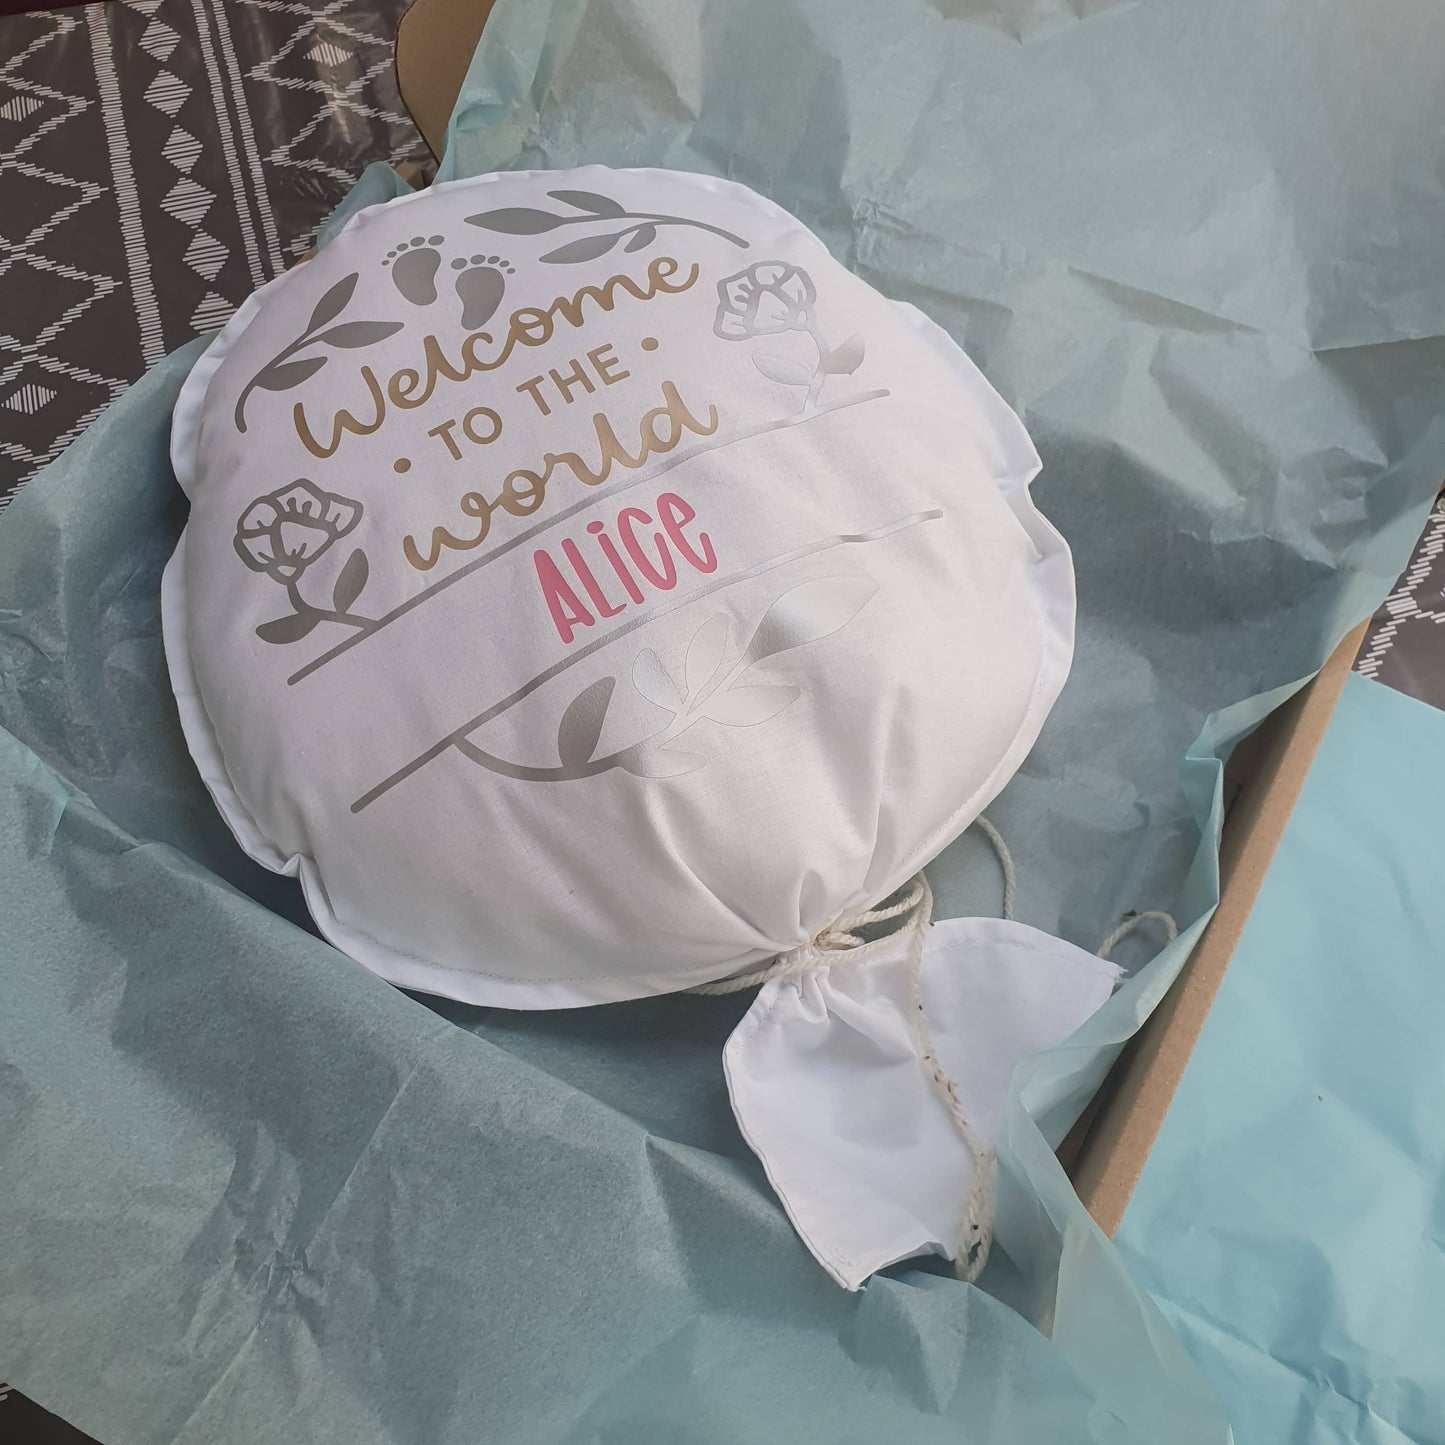 "Welcome to the world" fabric balloon